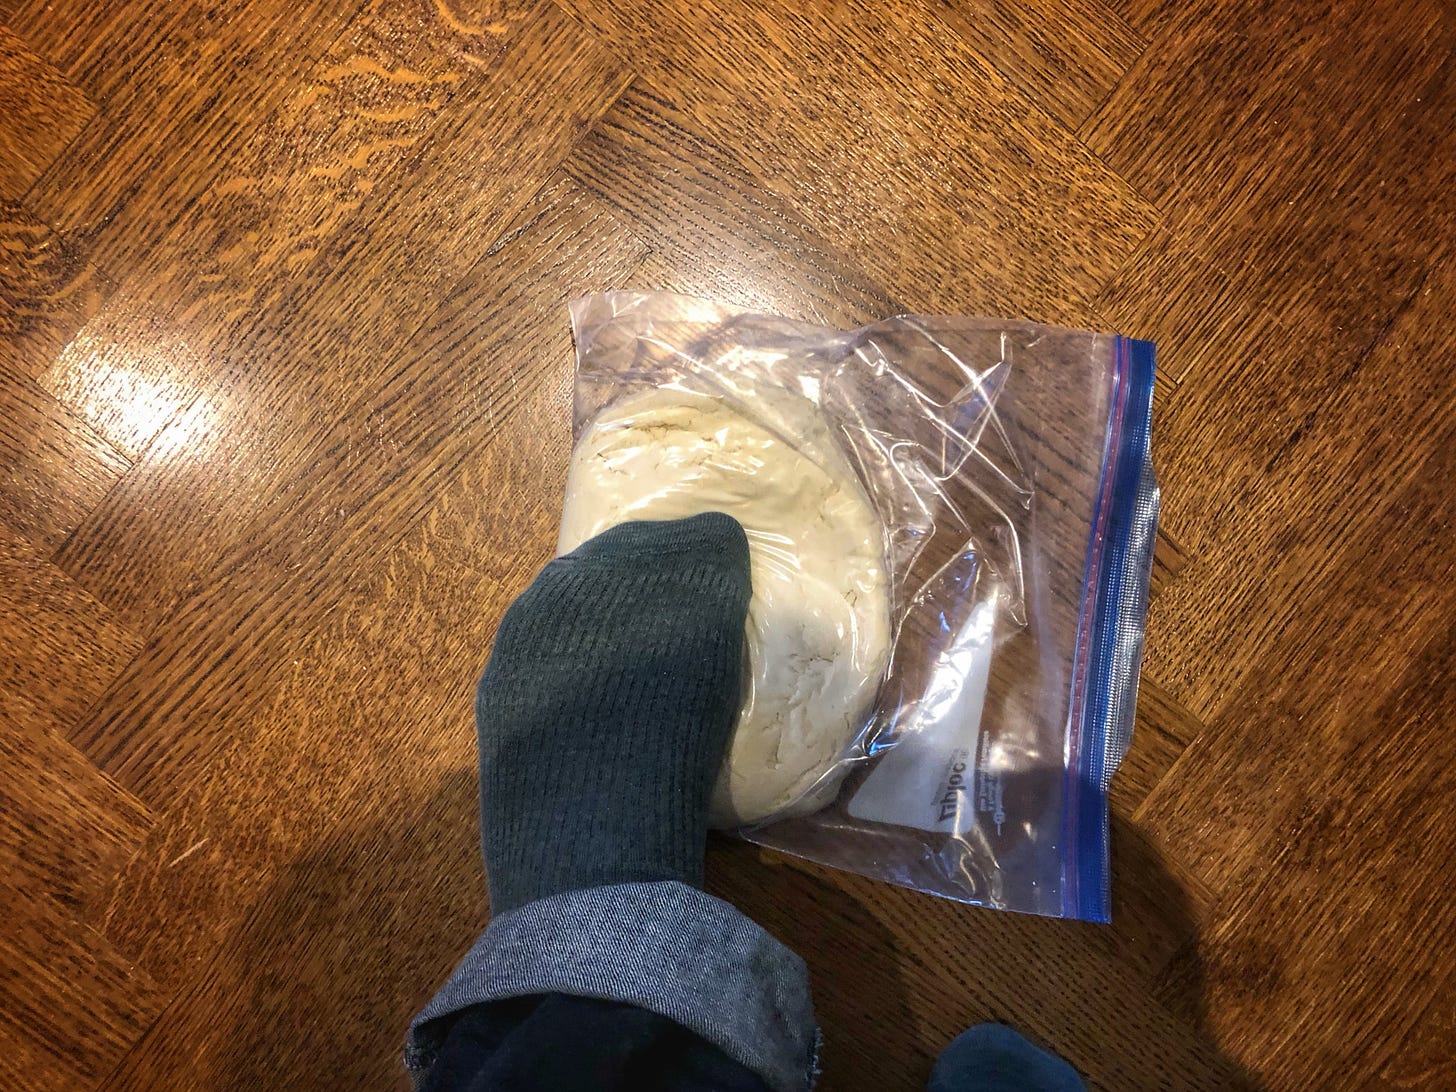 A foot stepping on a dough ball in a Ziploc bag